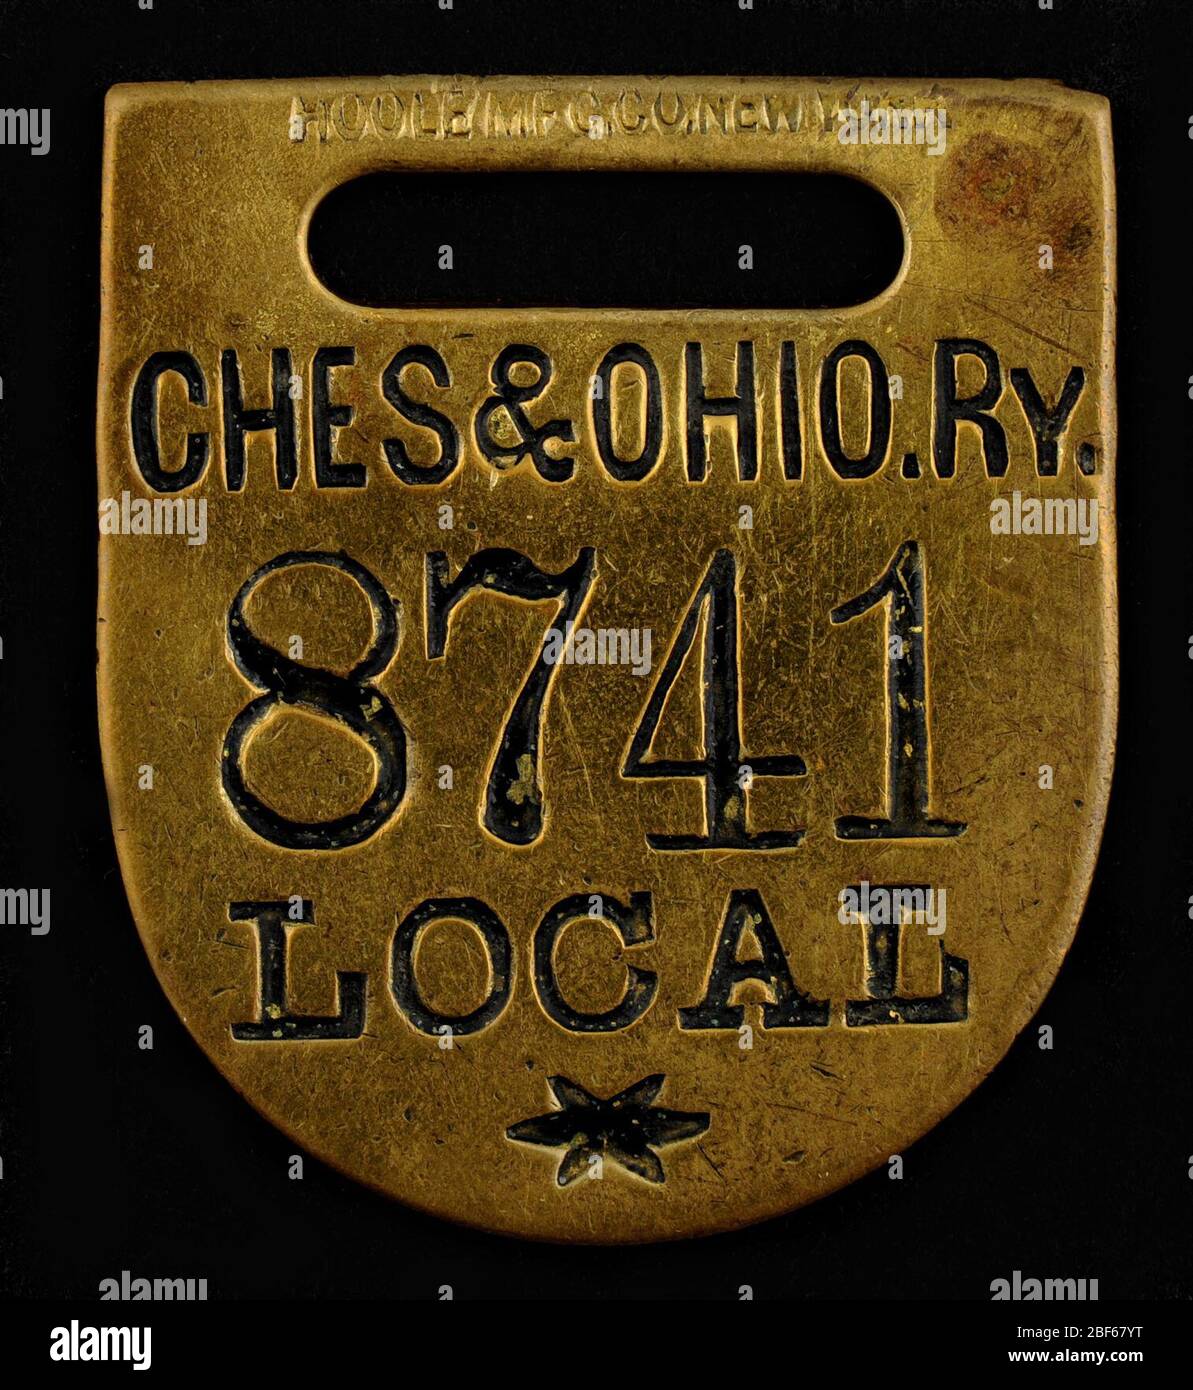 Chesapeake Ohio Railway Owney tag. Owney received this baggage check token while traveling along the Chesapeake & Ohio Railway. The “local” marking indicates that the tag was meant for use on the main line, not for someone traveling onto another railway line. Stock Photo